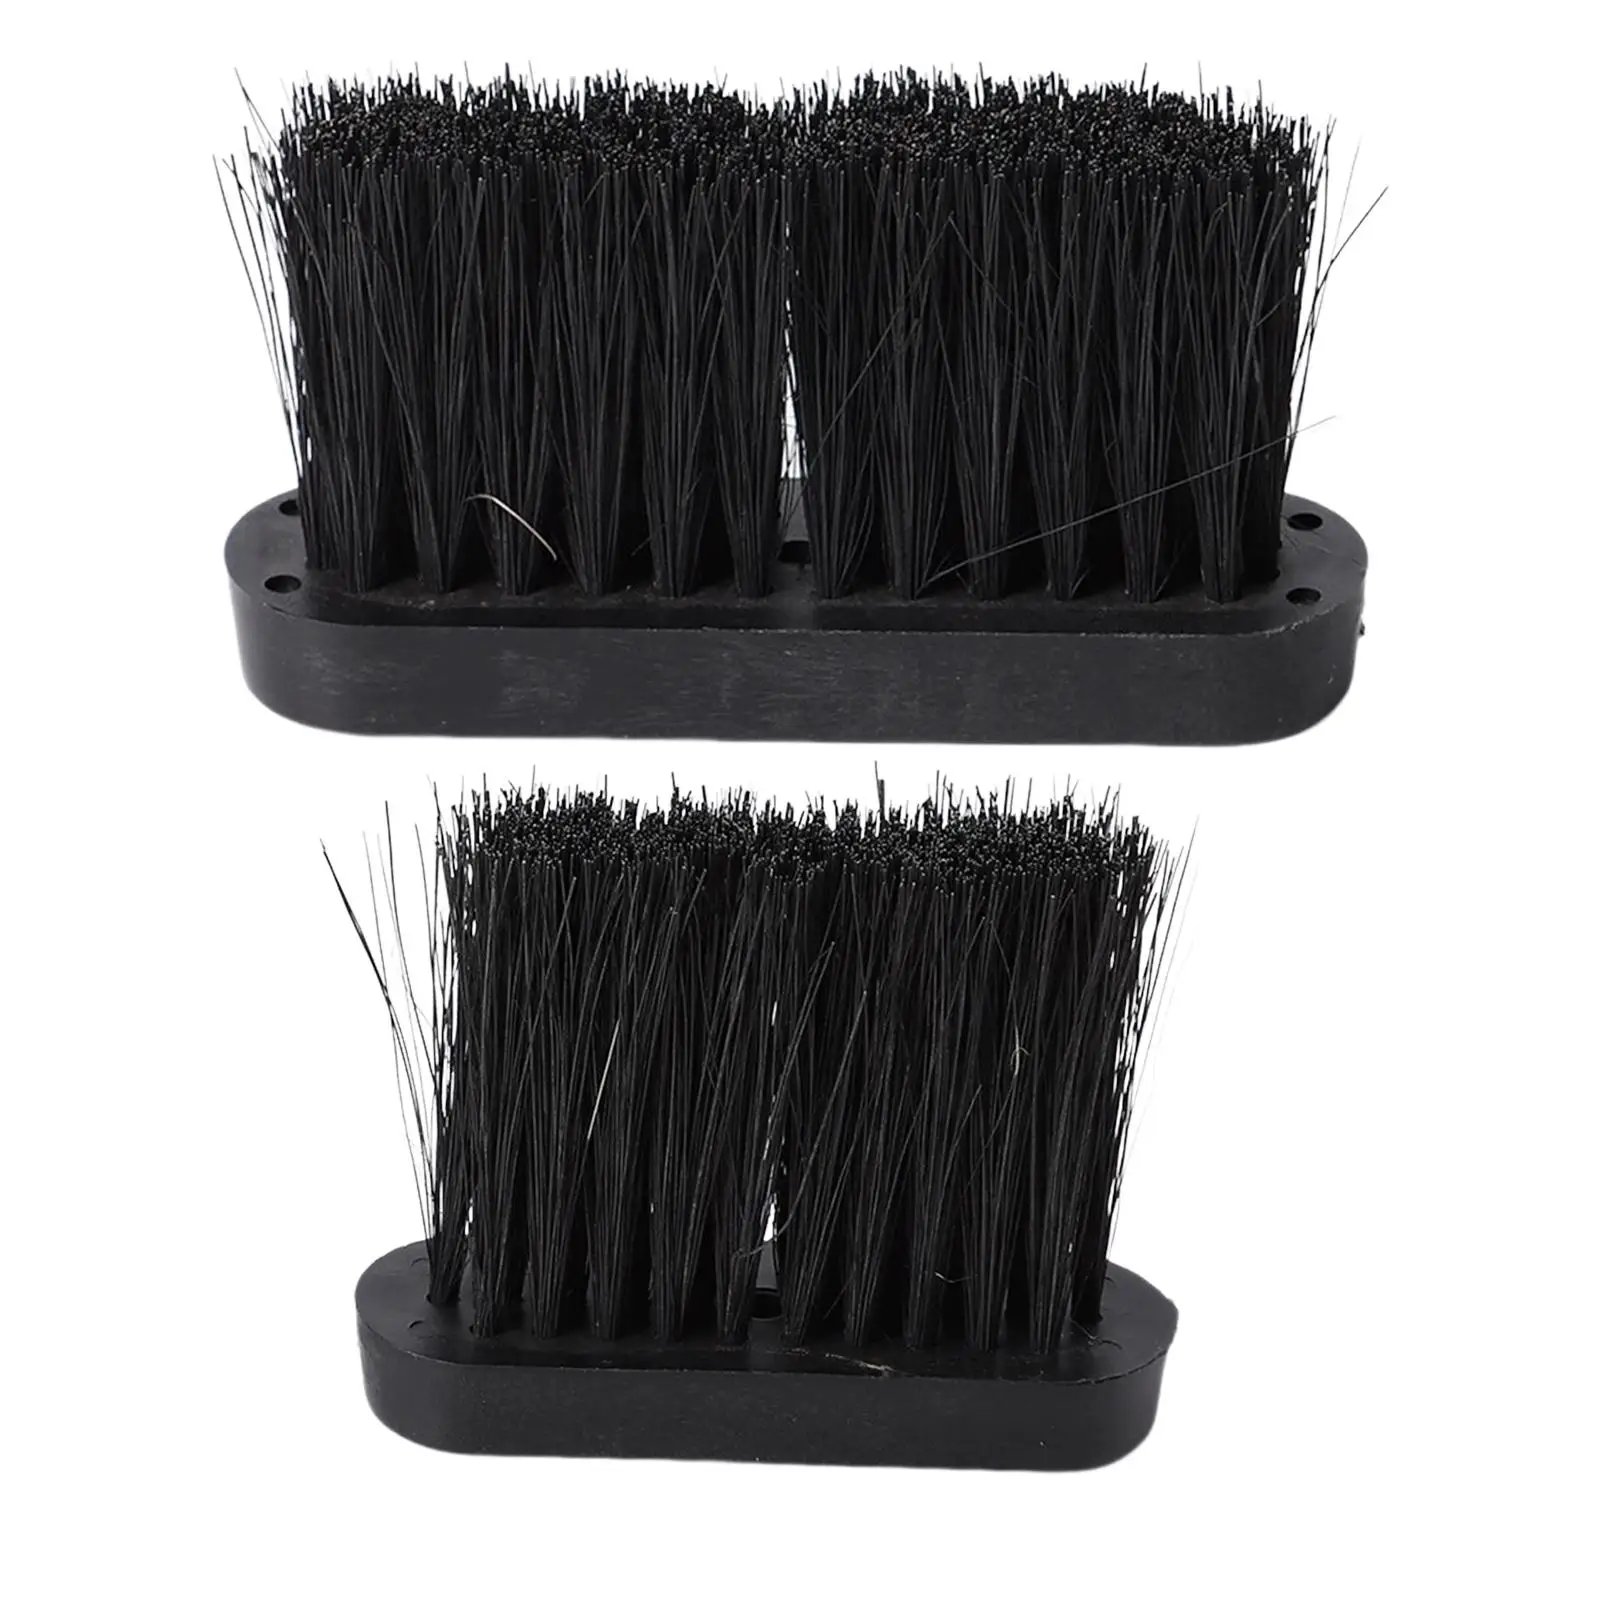 Fireplace Brush Spare Hearth Brush Head Chimney Cleaning for Fireplaces